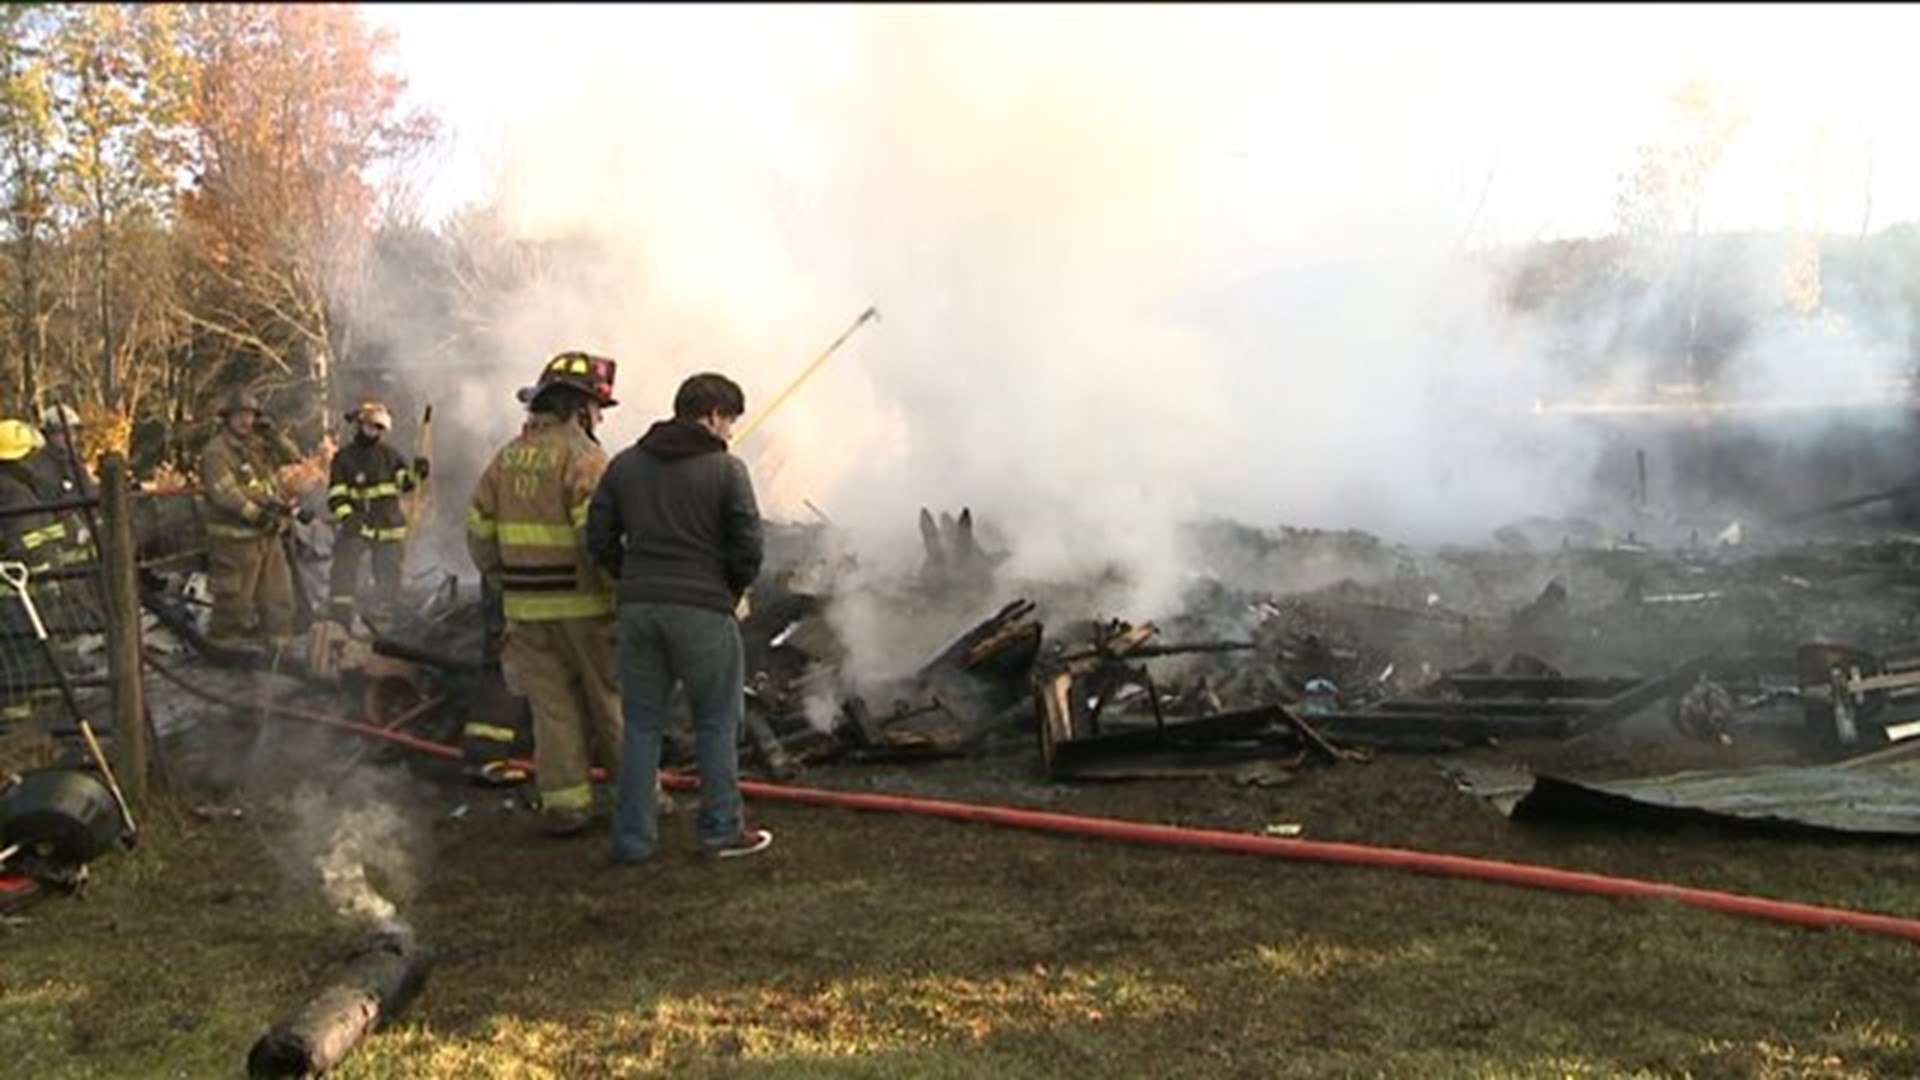 Crews Called to Fire in Luzerne County